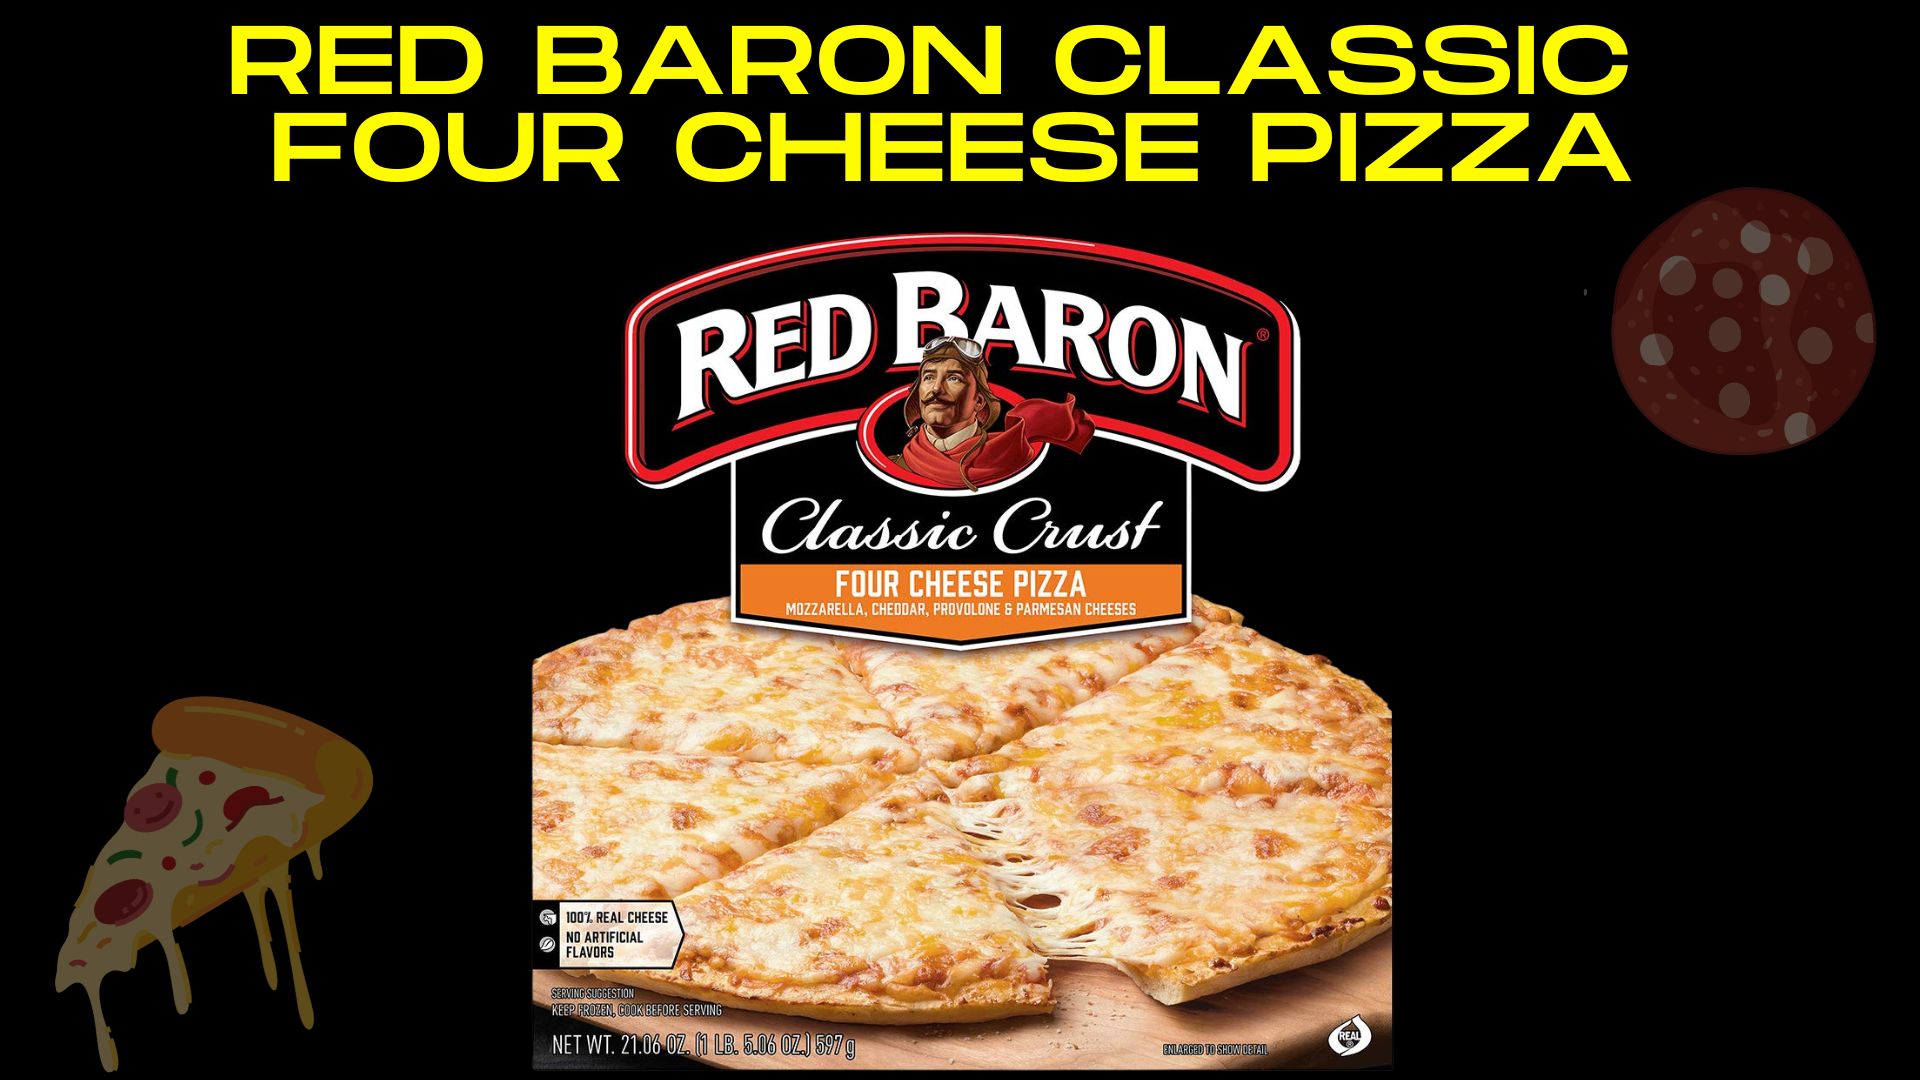 product image of Red Baron Classic Four Cheese Pizza with black background